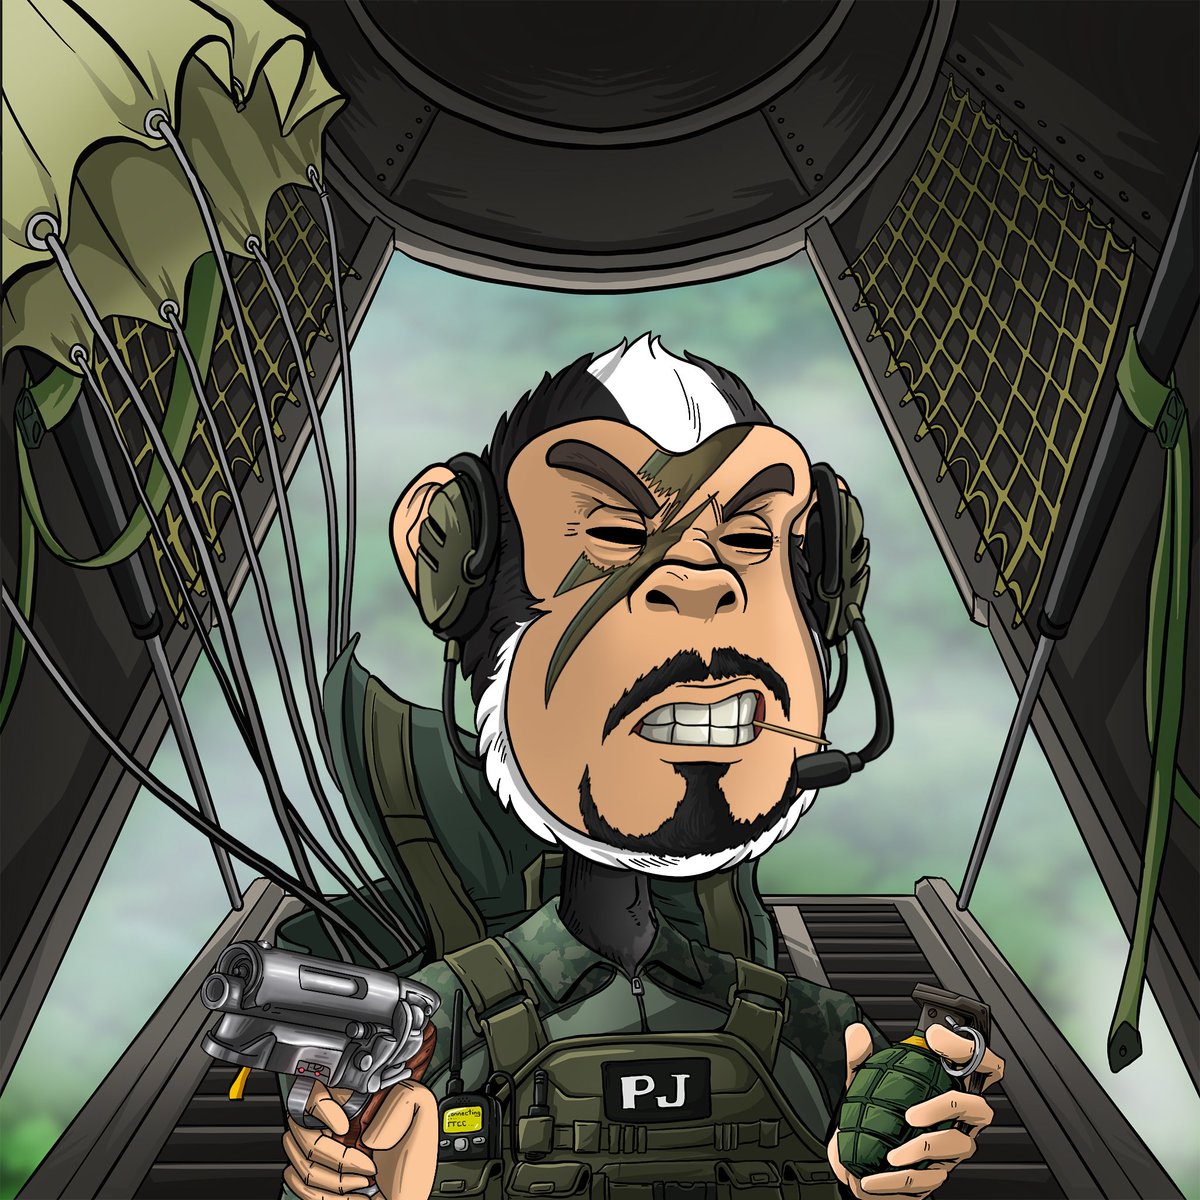 ⏰🐵 All systems are a go‼️‼️

🪂 PJ’s DEPLOY THIS FRIDAY JULY 28th 3pm EST‼️‼️

Sergeant Skunk is ready to carry out his duties 🔫

Special Ops part 3 INCOMING {420 🦭} 

Who fading @TTChimpsClub x @TTCC420SealzDAO anon❓❓

#TTChimpsClub #TTCC420SealzDao #SpecialOps #PJs